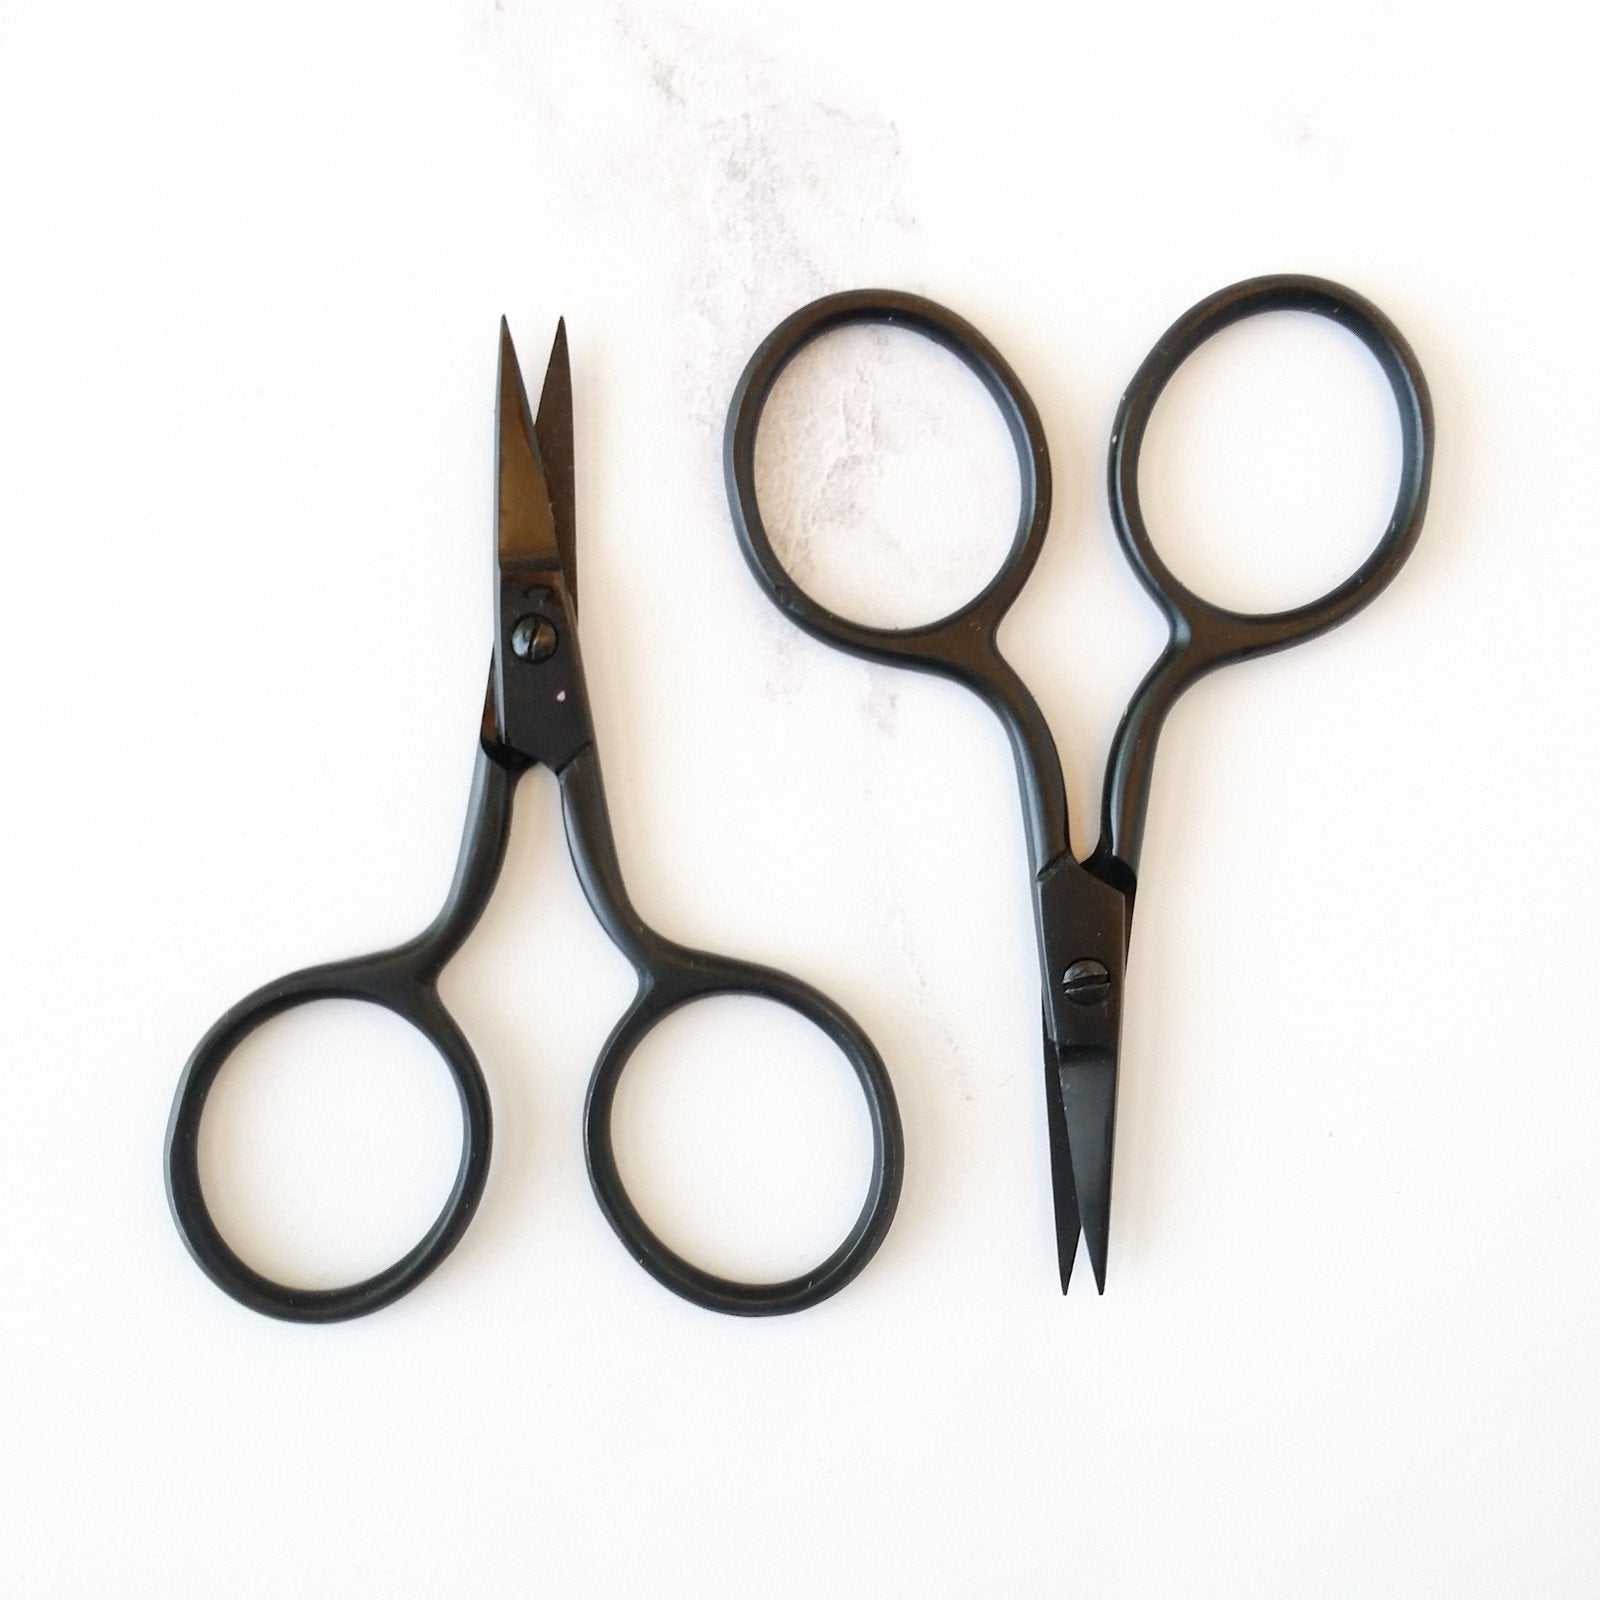 Tiny Snips Embroidery Scissors - Black/Gold 2.5